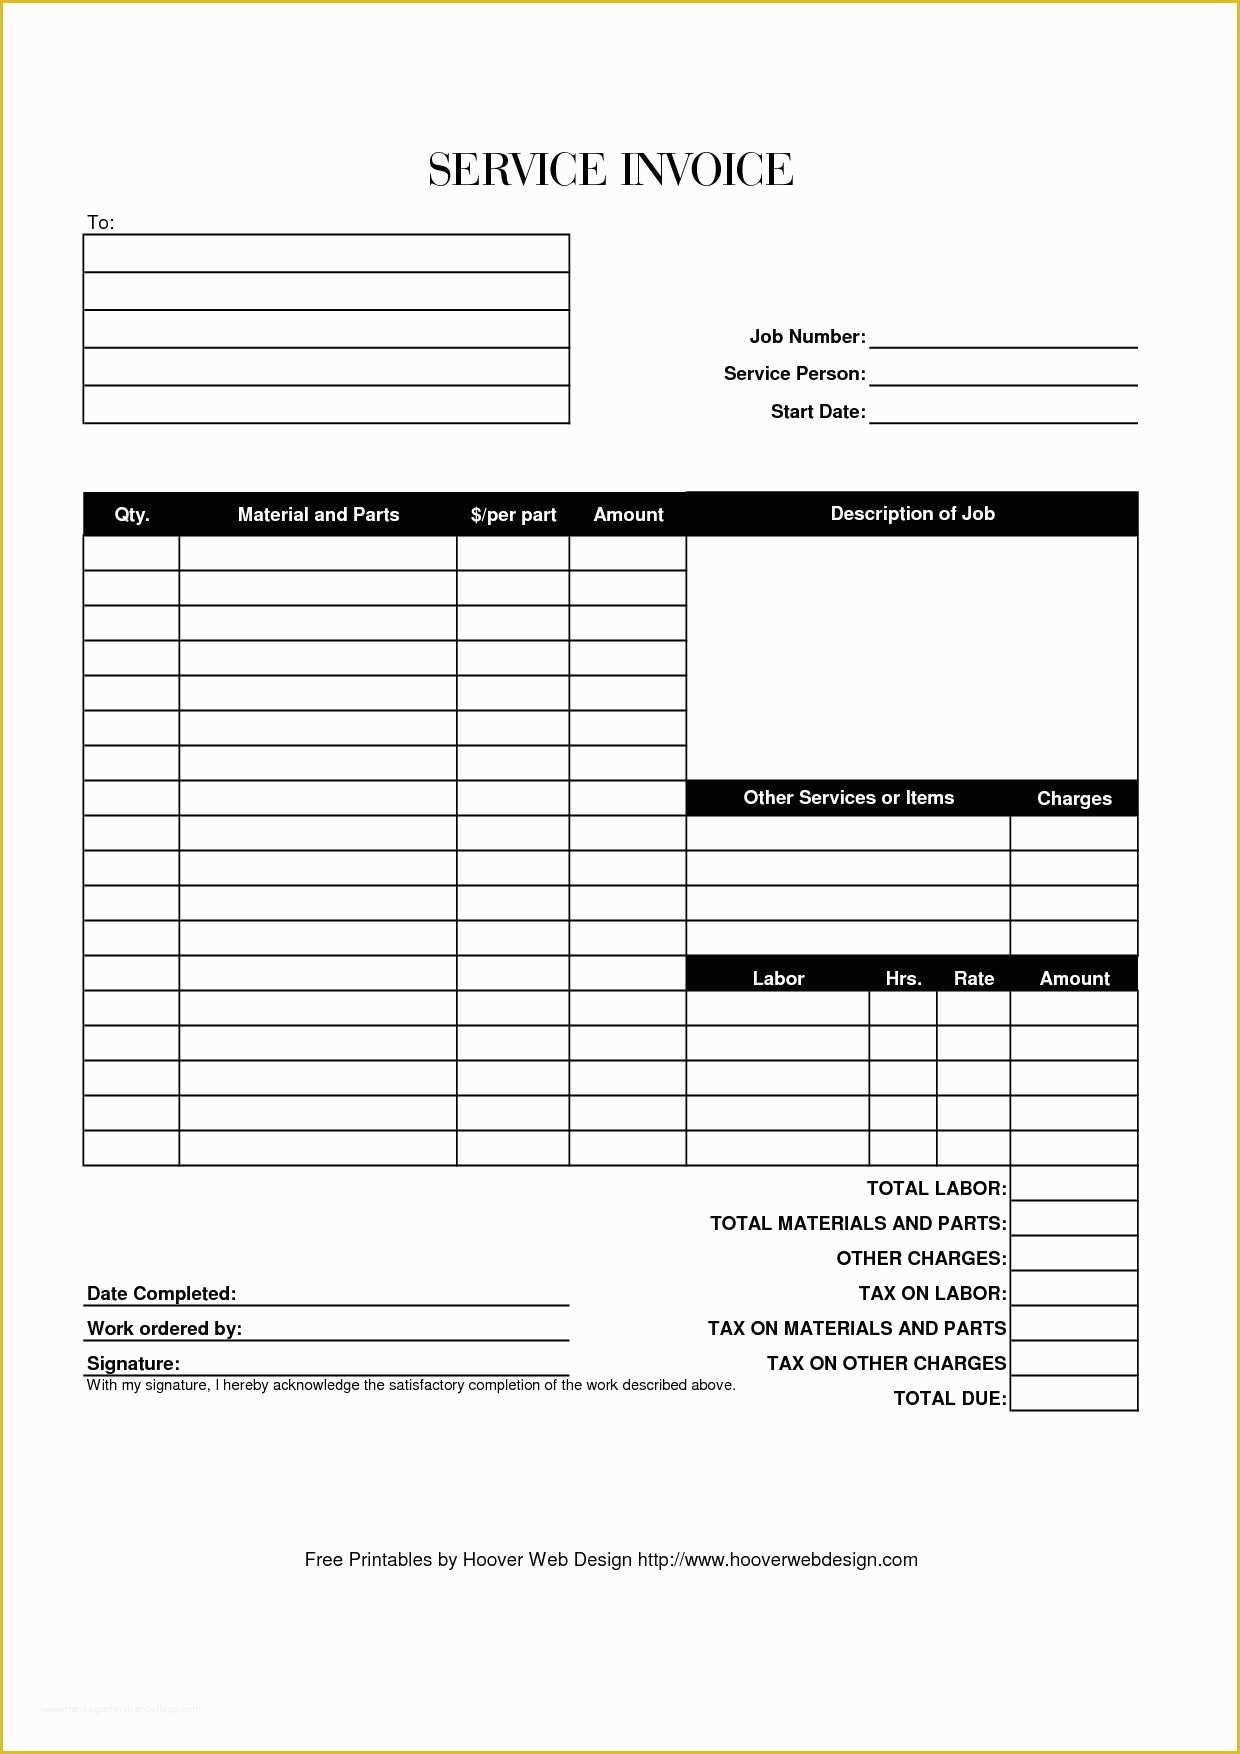 Service Invoice Template Free Of Blank Service Invoice Blank Invoice Blank Service Invoice